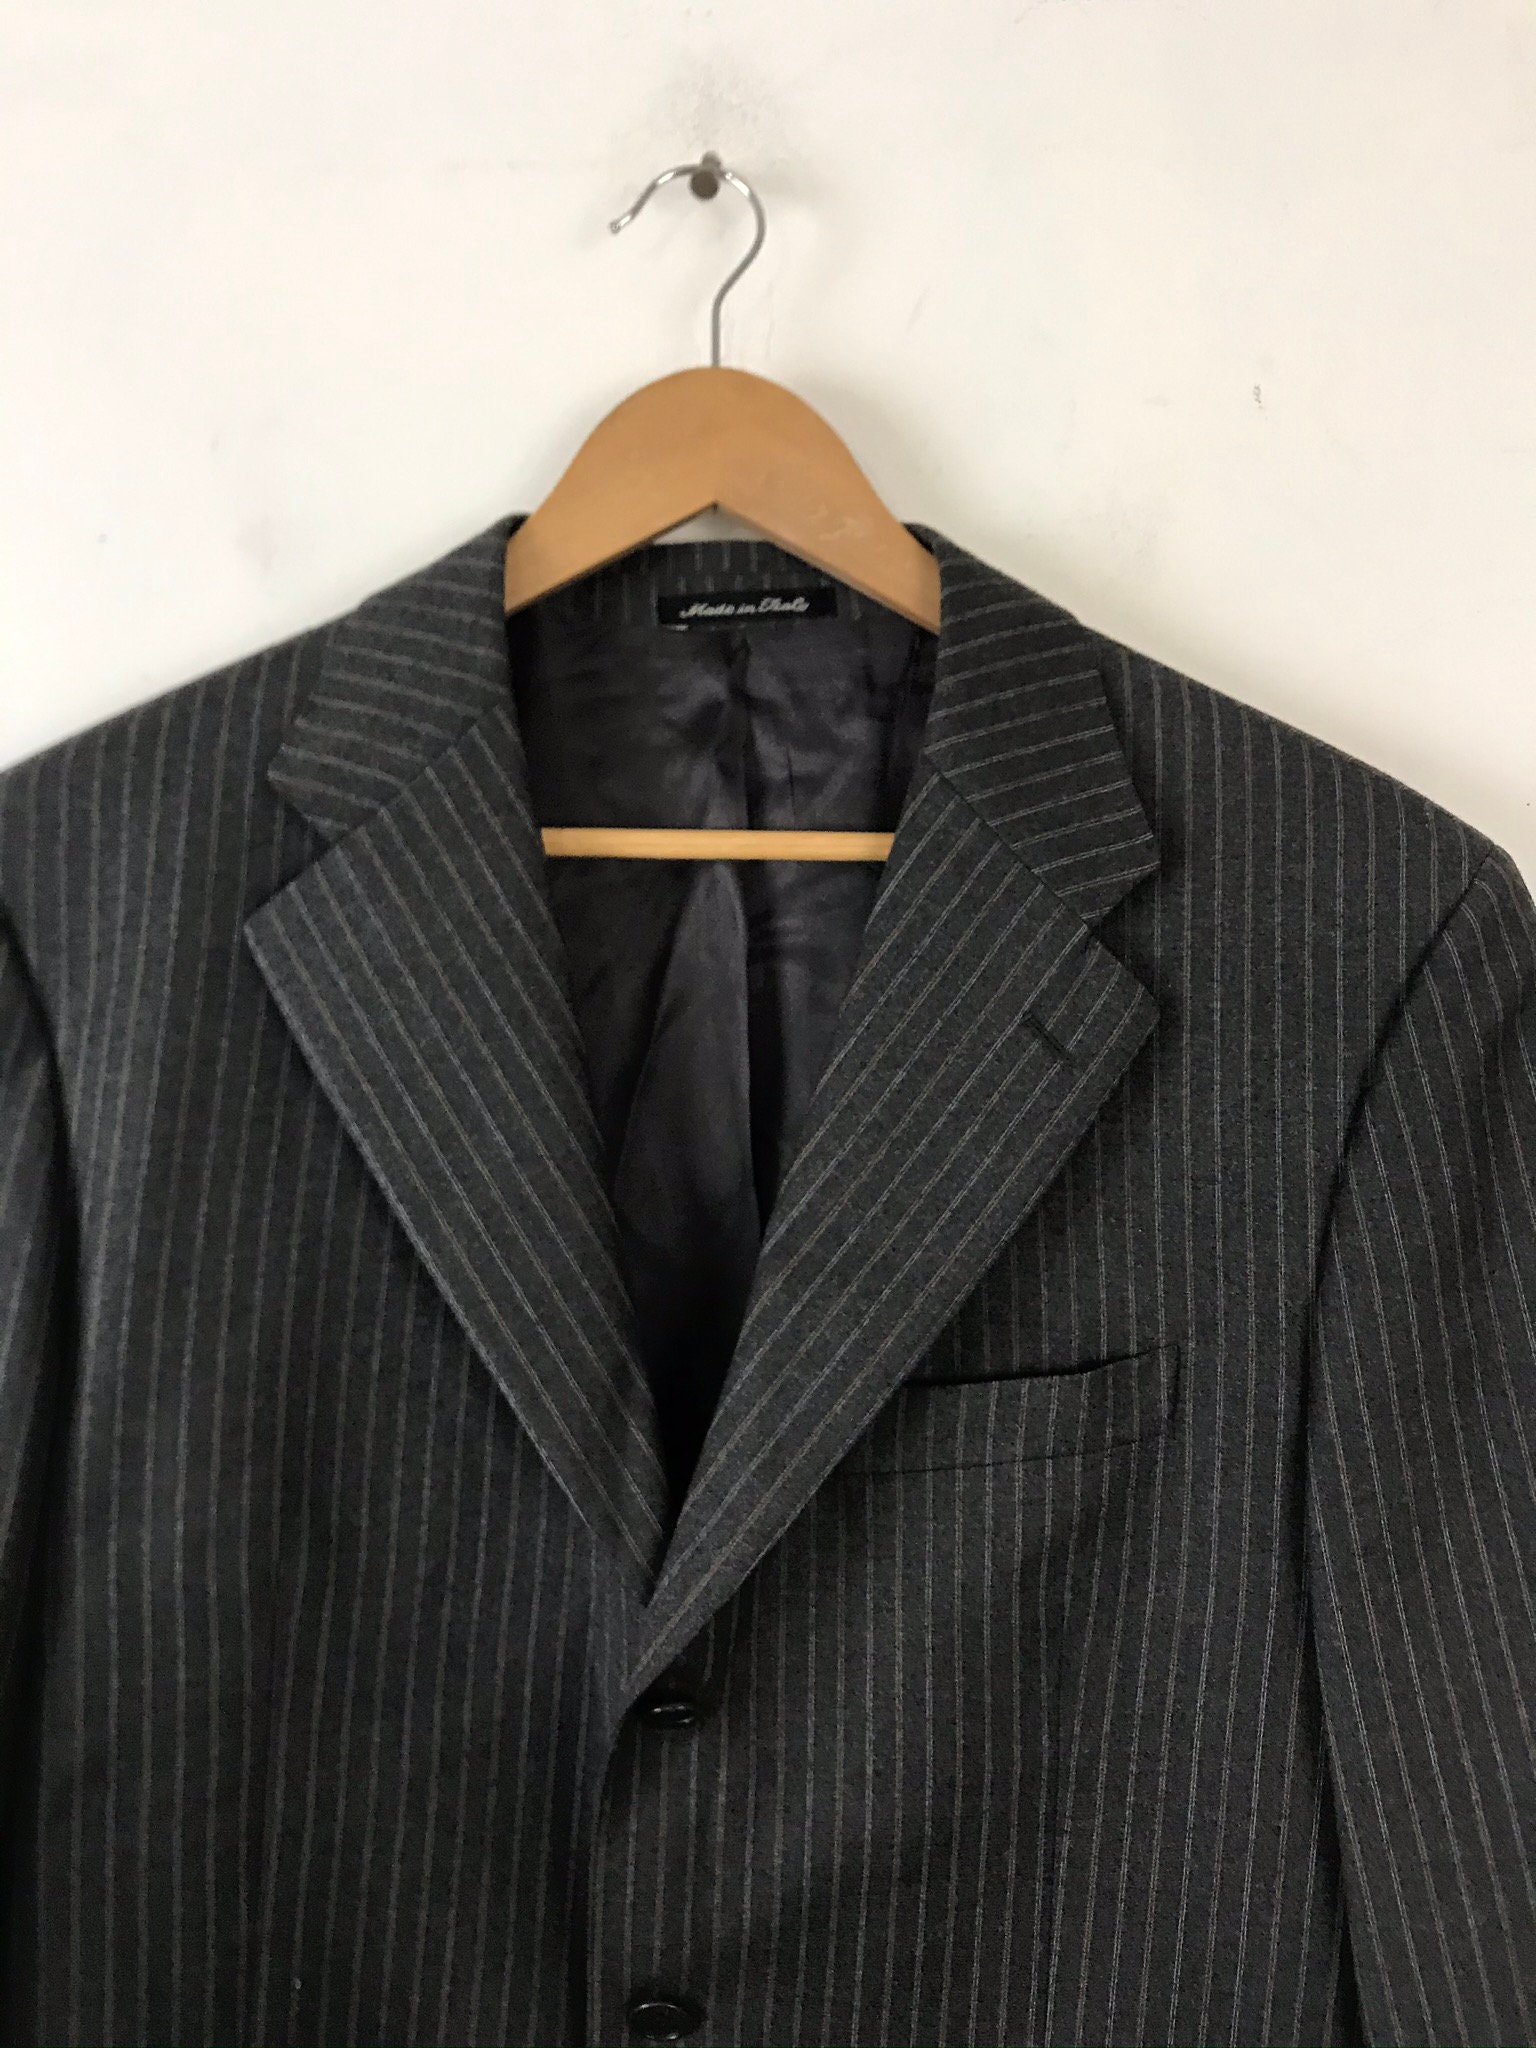 90s Dark Gray Pinstriped Two Piece Suit Mens Size 44L & 36W - Etsy